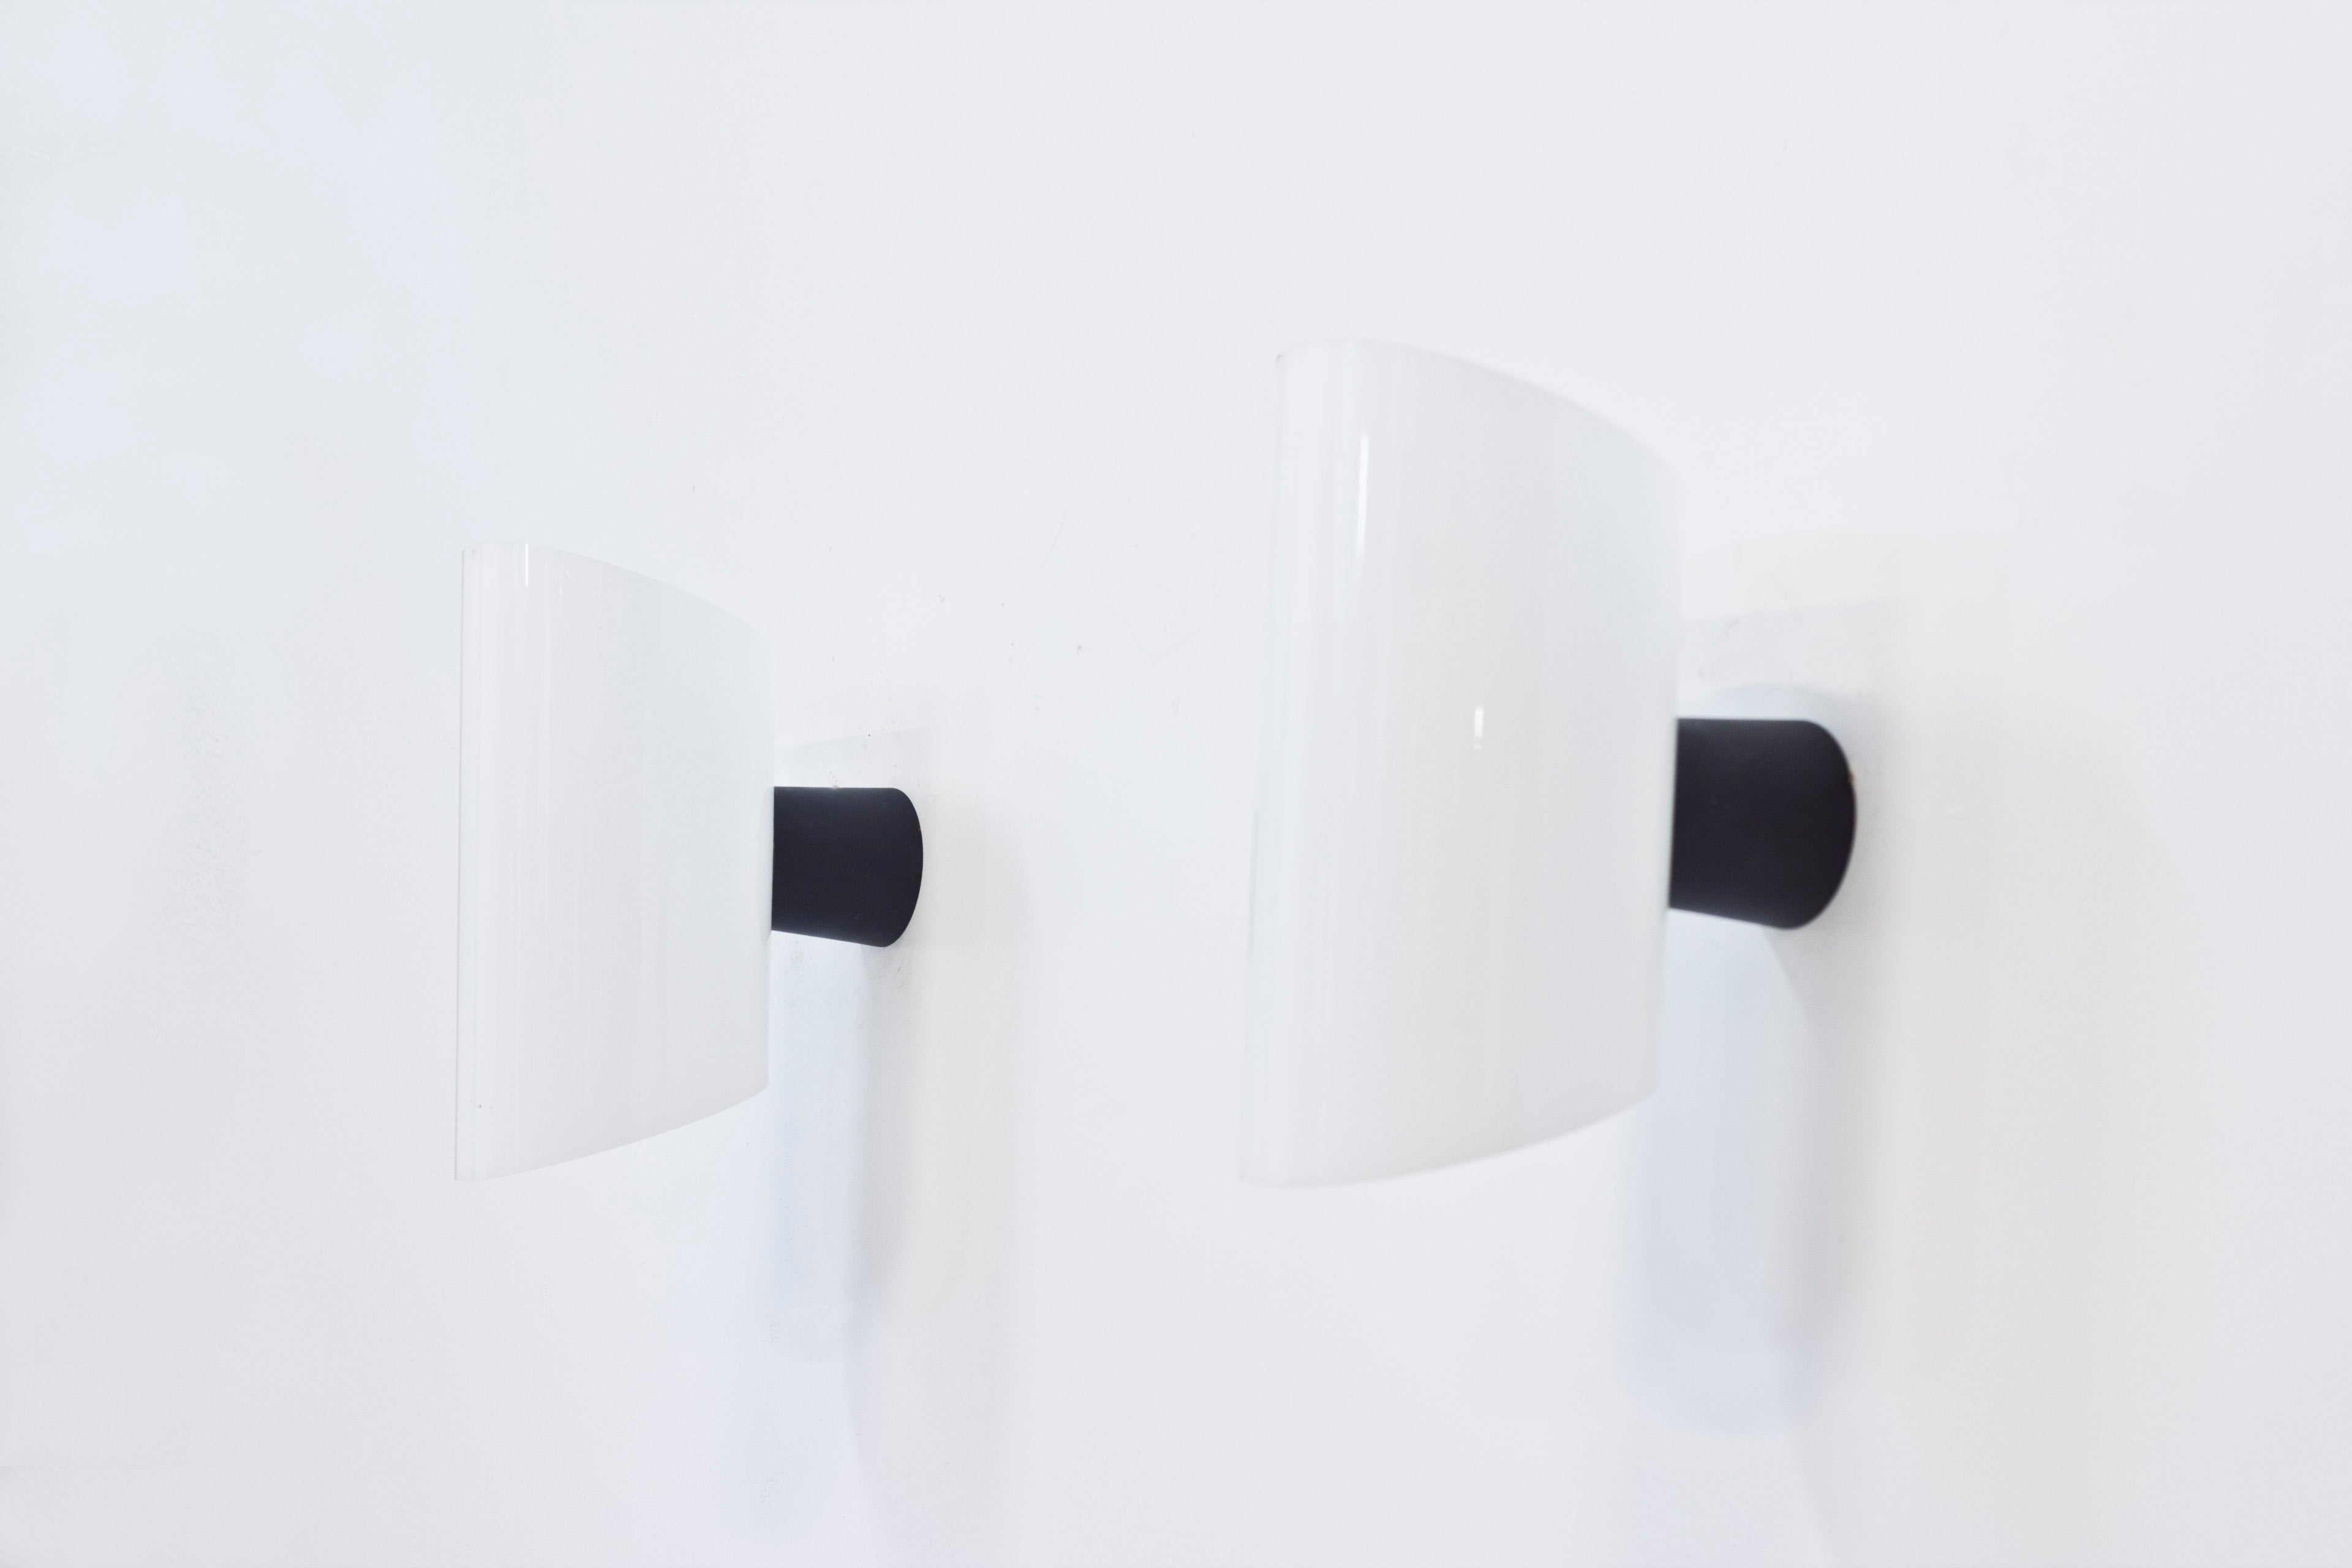 Wall lamps by Bo Råman for ASEA